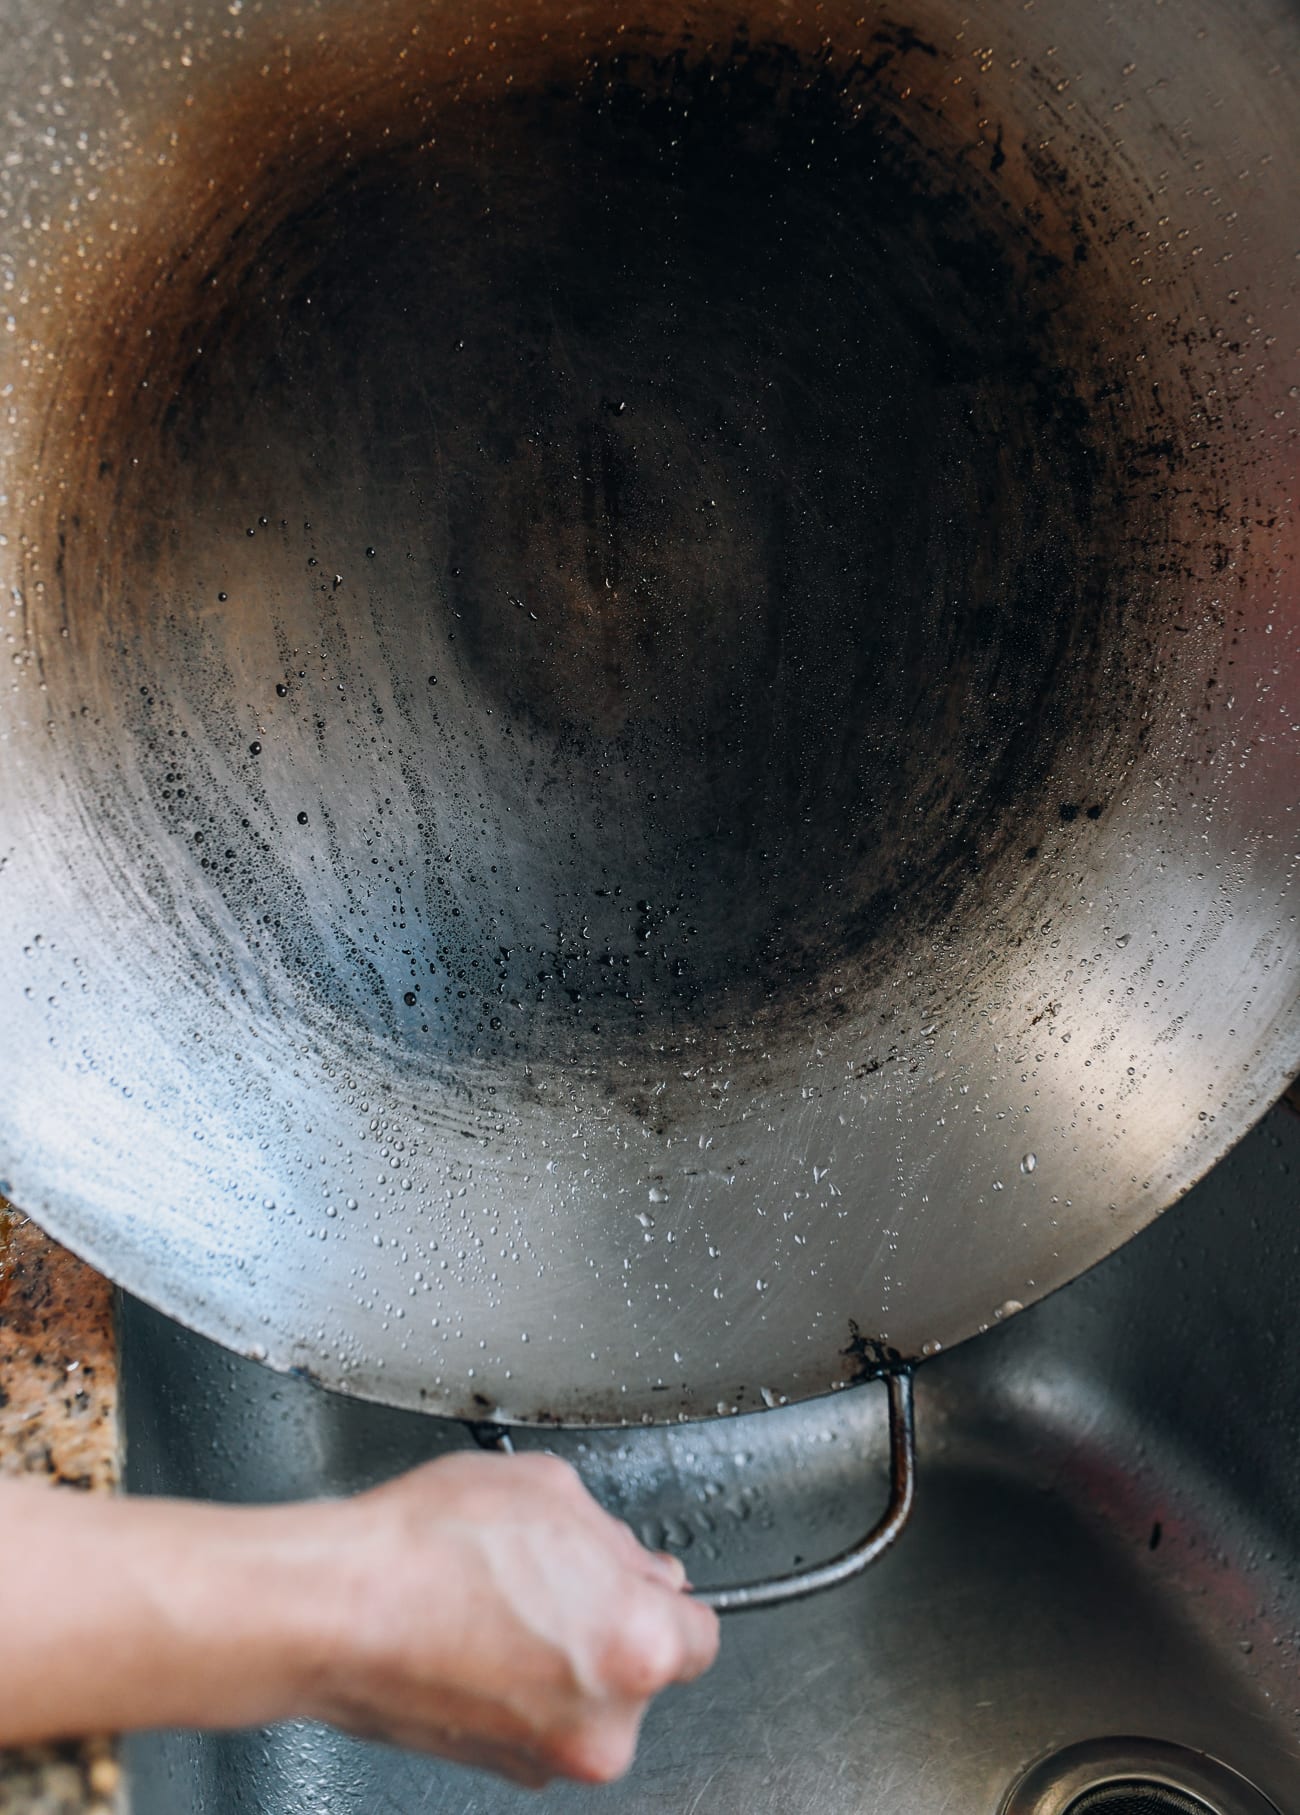 How to Wash a Wok - holding up a clean wok over the sink